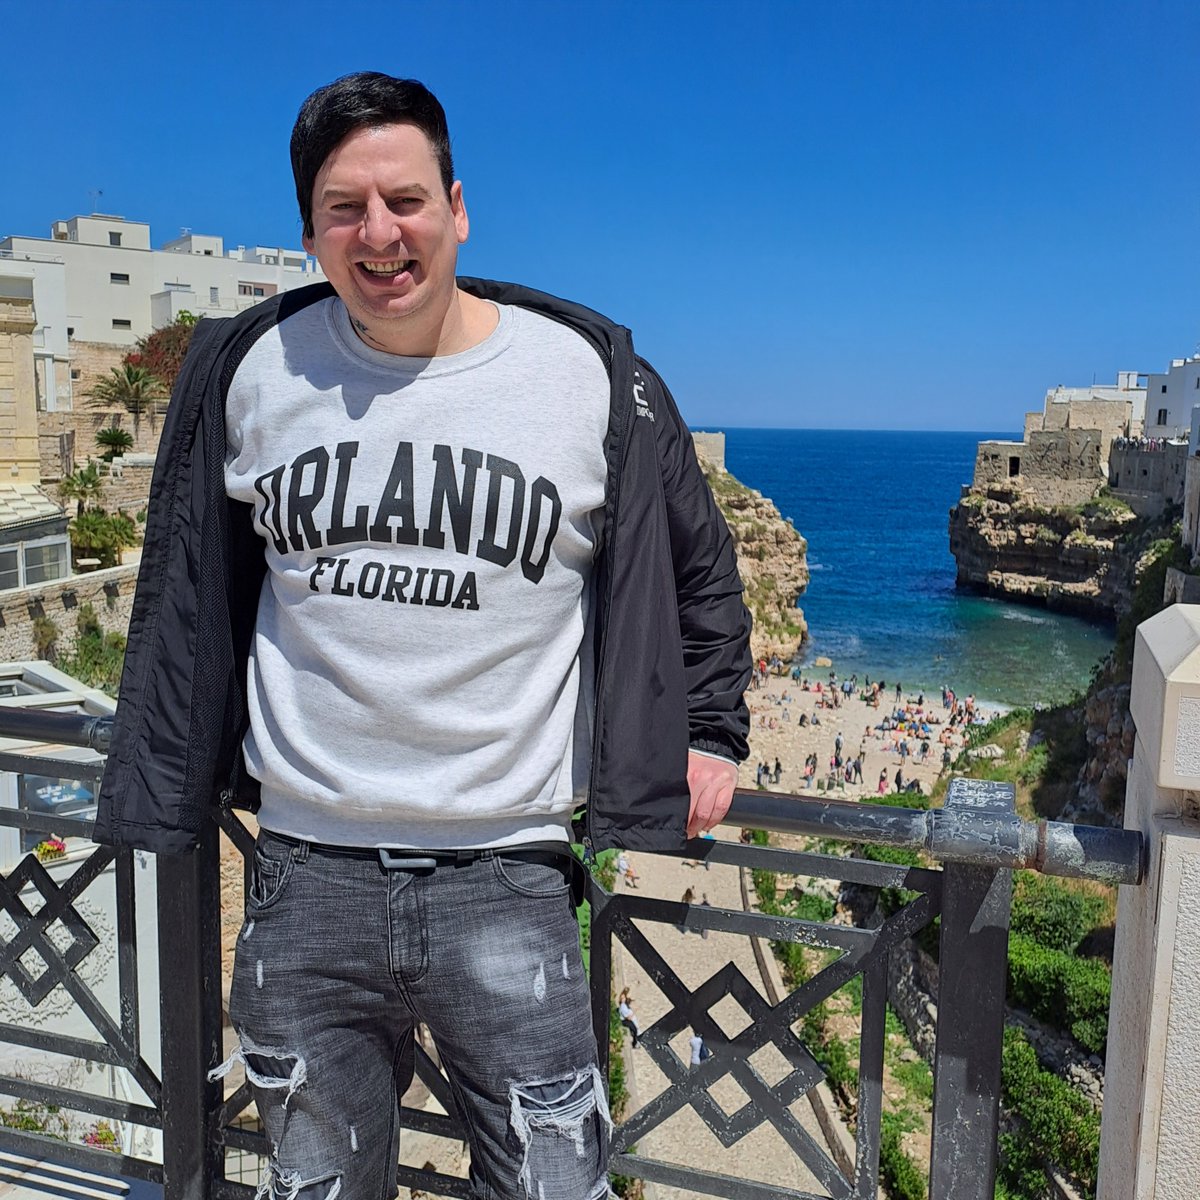 Rick is enjoying the view of 'Lama Monachile' from the 15 meter high 19th century bridge built by the Bourbons in Polignano a Mare, Italy. 🧒🏖️ #rickwesley #richkids #polignanoamare #apulia #lamamonachile #bridge #beach #sea #relax